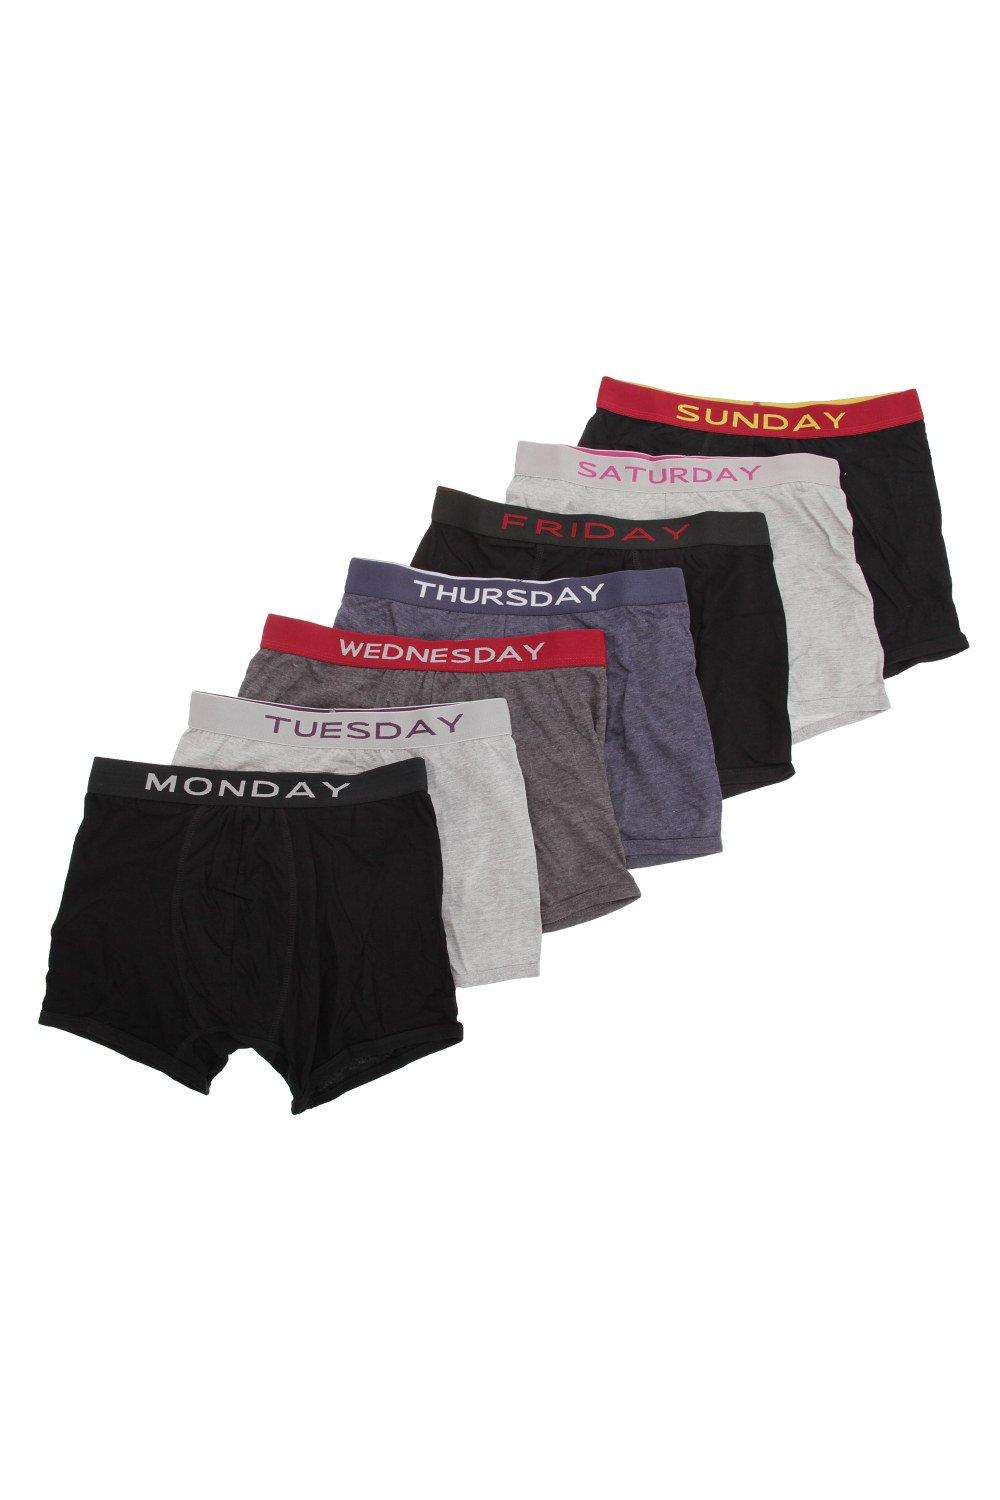 Buy Universal Textiles Mens Days of The Week Boxer Shorts/Underwear (Pack  of 7) (M Waist 33-35inch) (Black) at